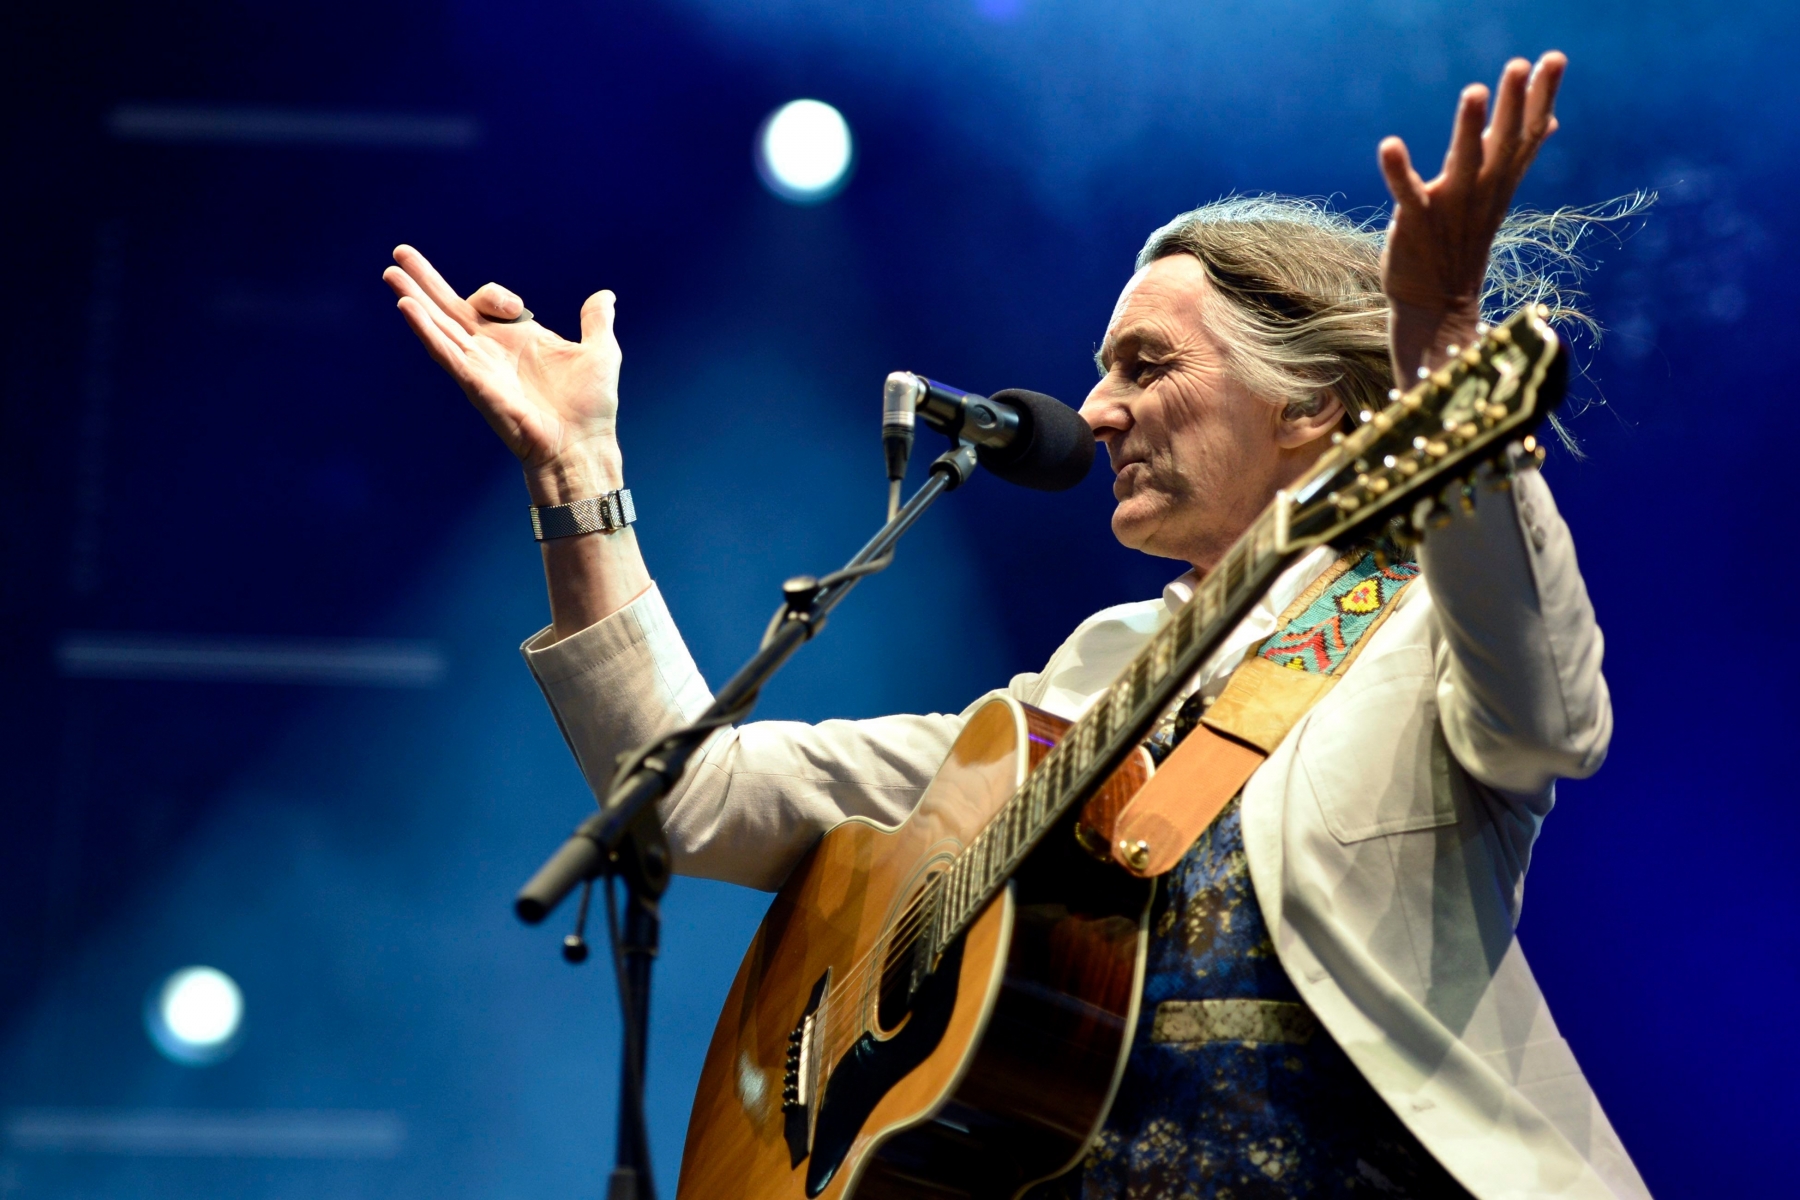 British vocalist and musician Roger Hodgson performs on the main stage during the 37th edition of the Paleo Festival in Nyon, Switzerland, Sunday, July 22, 2012. (KEYSTONE/Martial Trezzini) SWITZERLAND PALEO FESTIVAL HODGSON